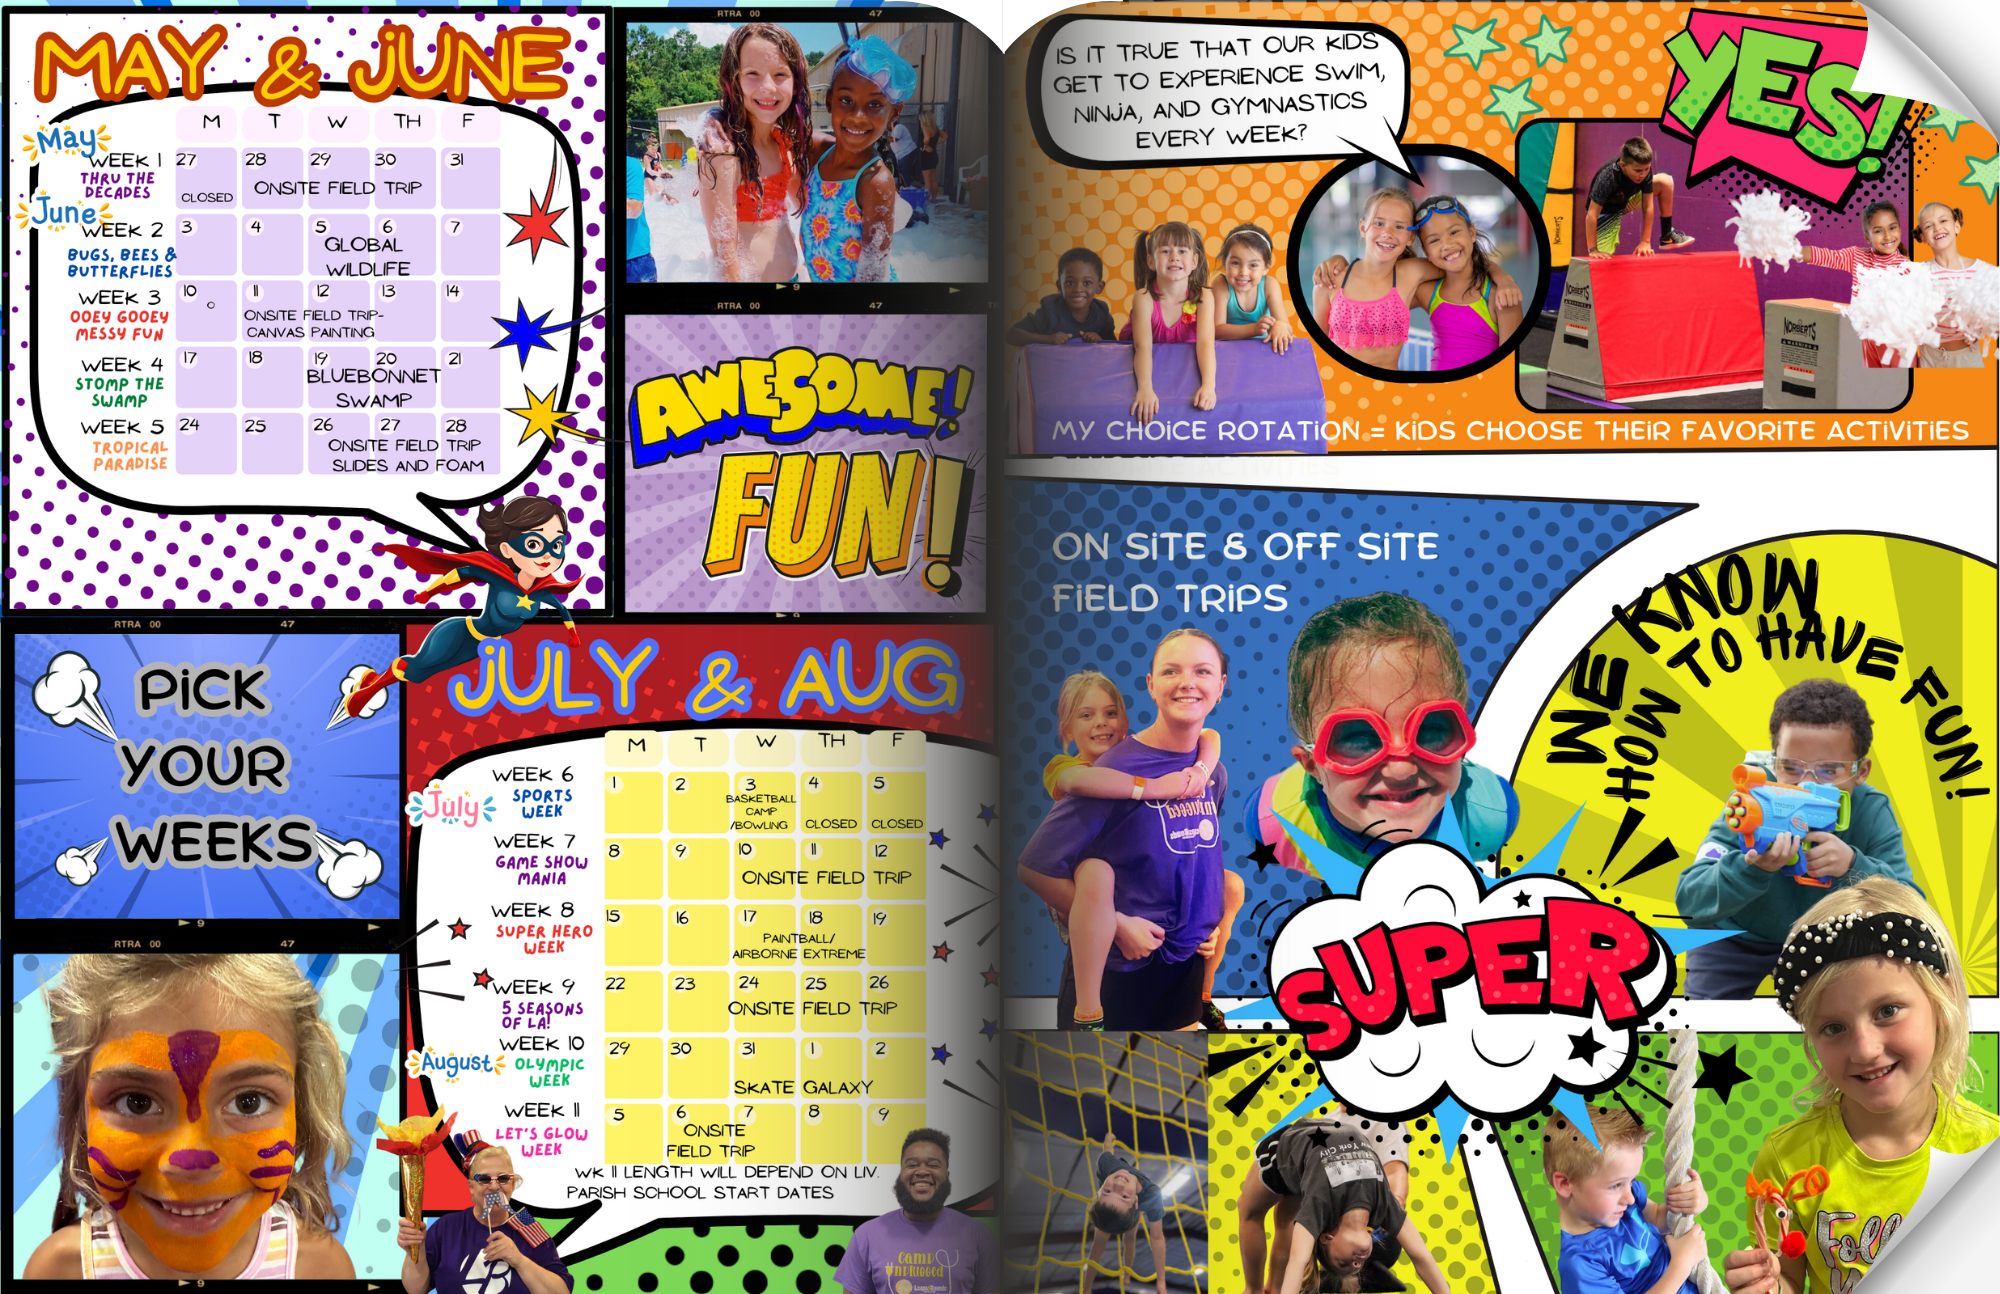 A colorful camp brochure, featuring a calendar for May-August with various activities and field trips, along with photos of children and counselors engaging in fun camp events like Youth Swim Lessons Denham Springs, a child with face paint, a costumed mascot, and vibrant text bubbles like "Awesome fun!" and "Super.